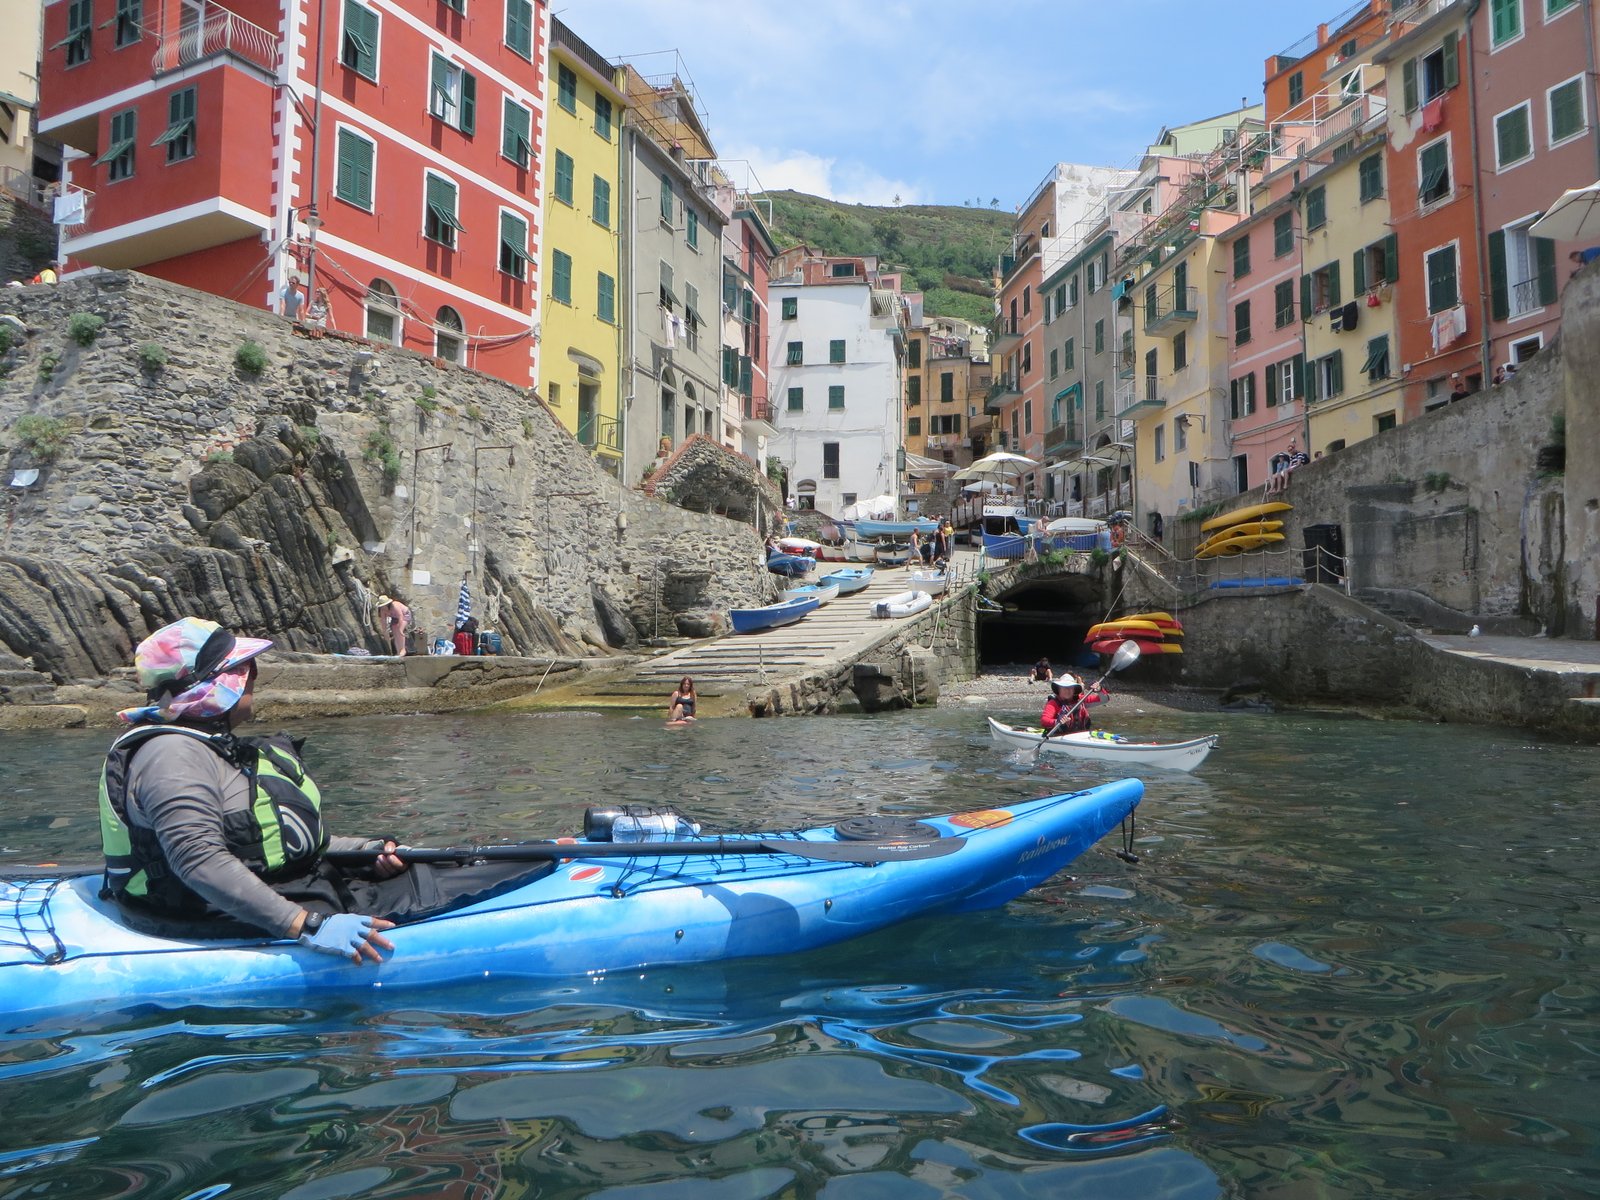 Experience La Dolce Vita at the Pace of a Paddle Stroke